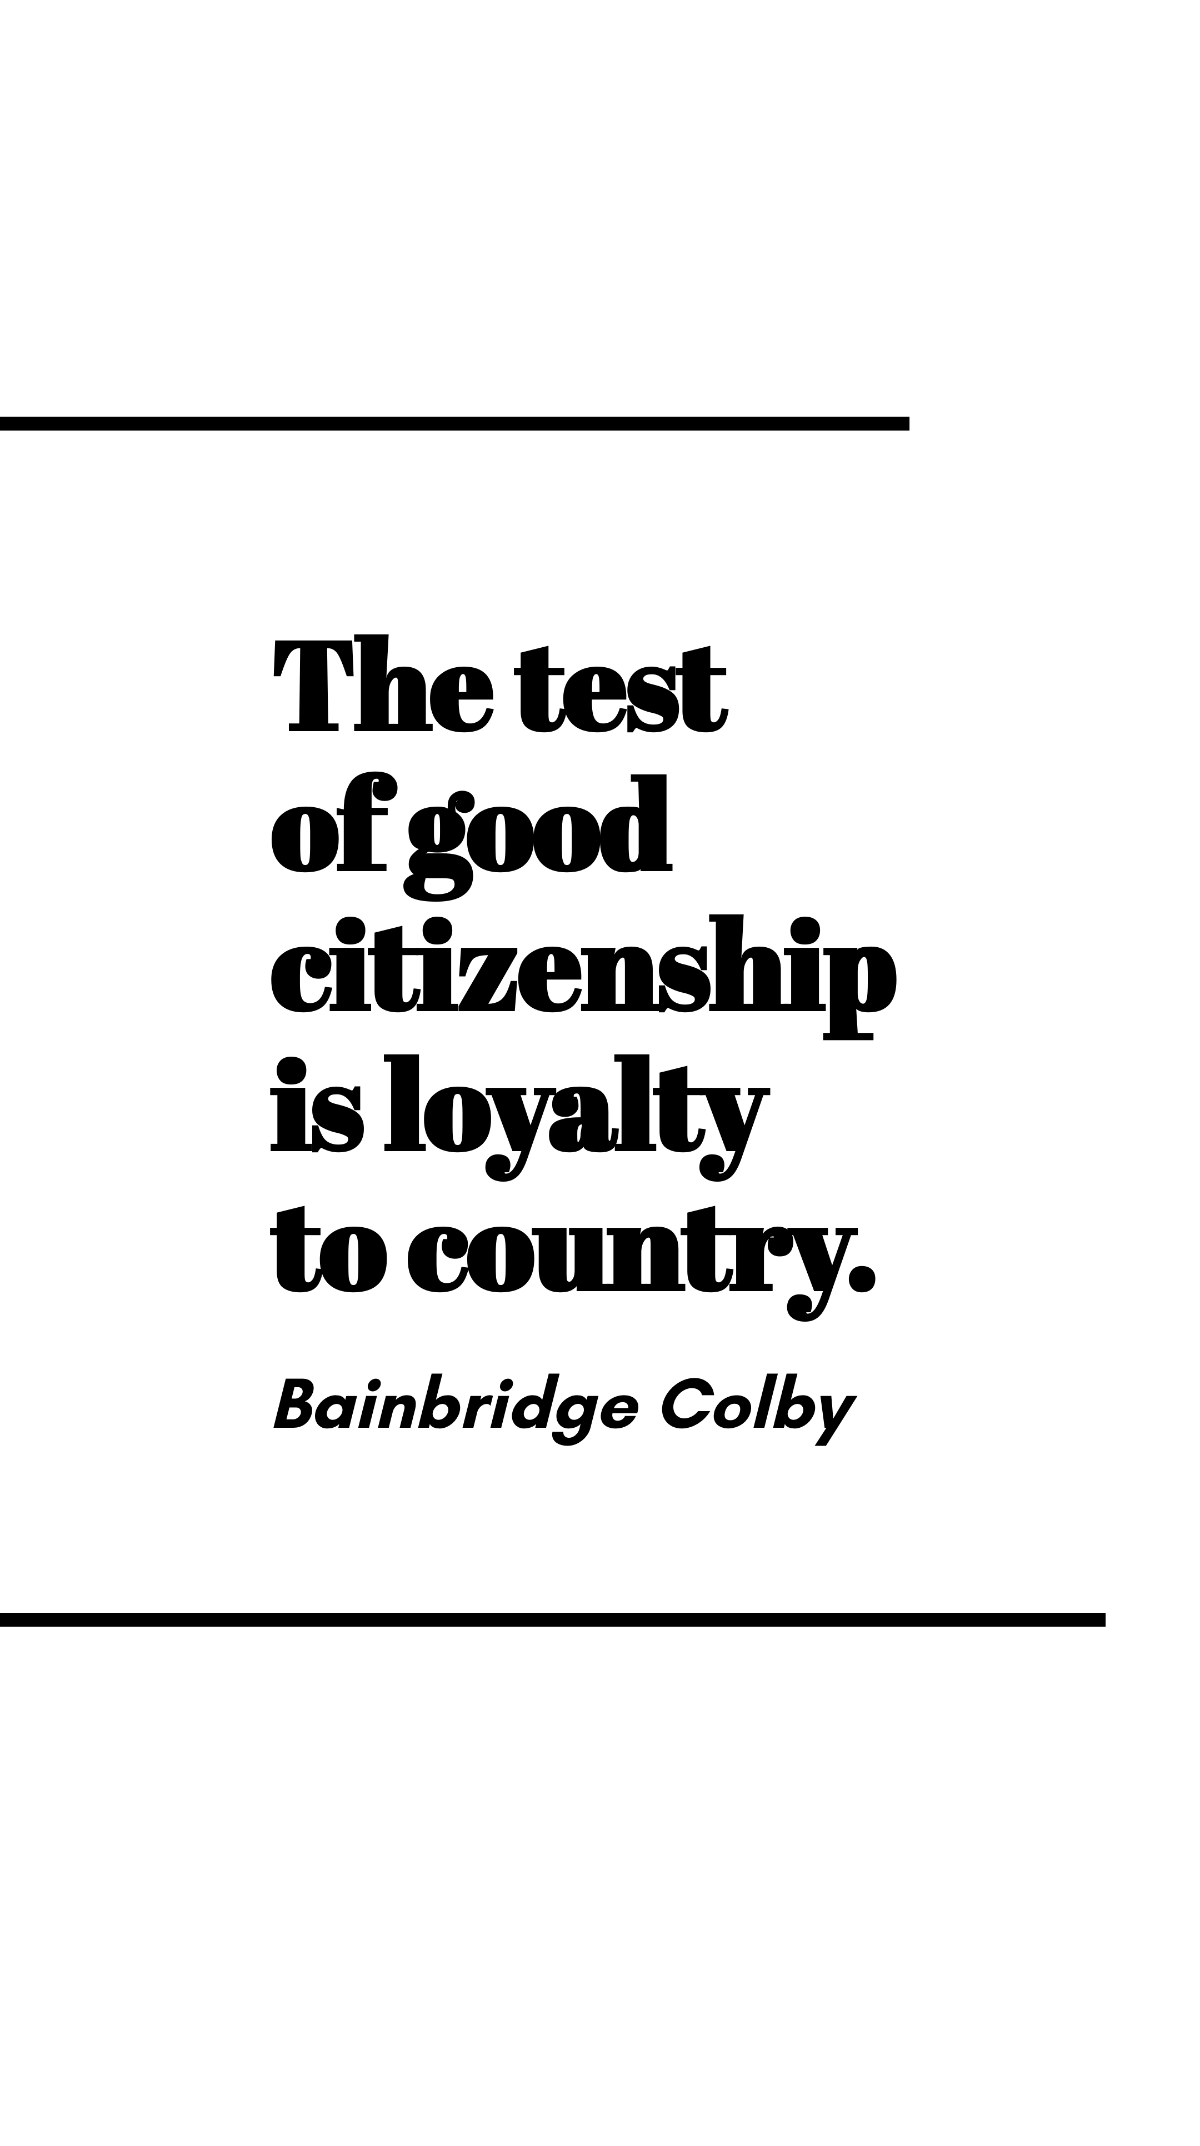 Bainbridge Colby - The test of good citizenship is loyalty to country. Template